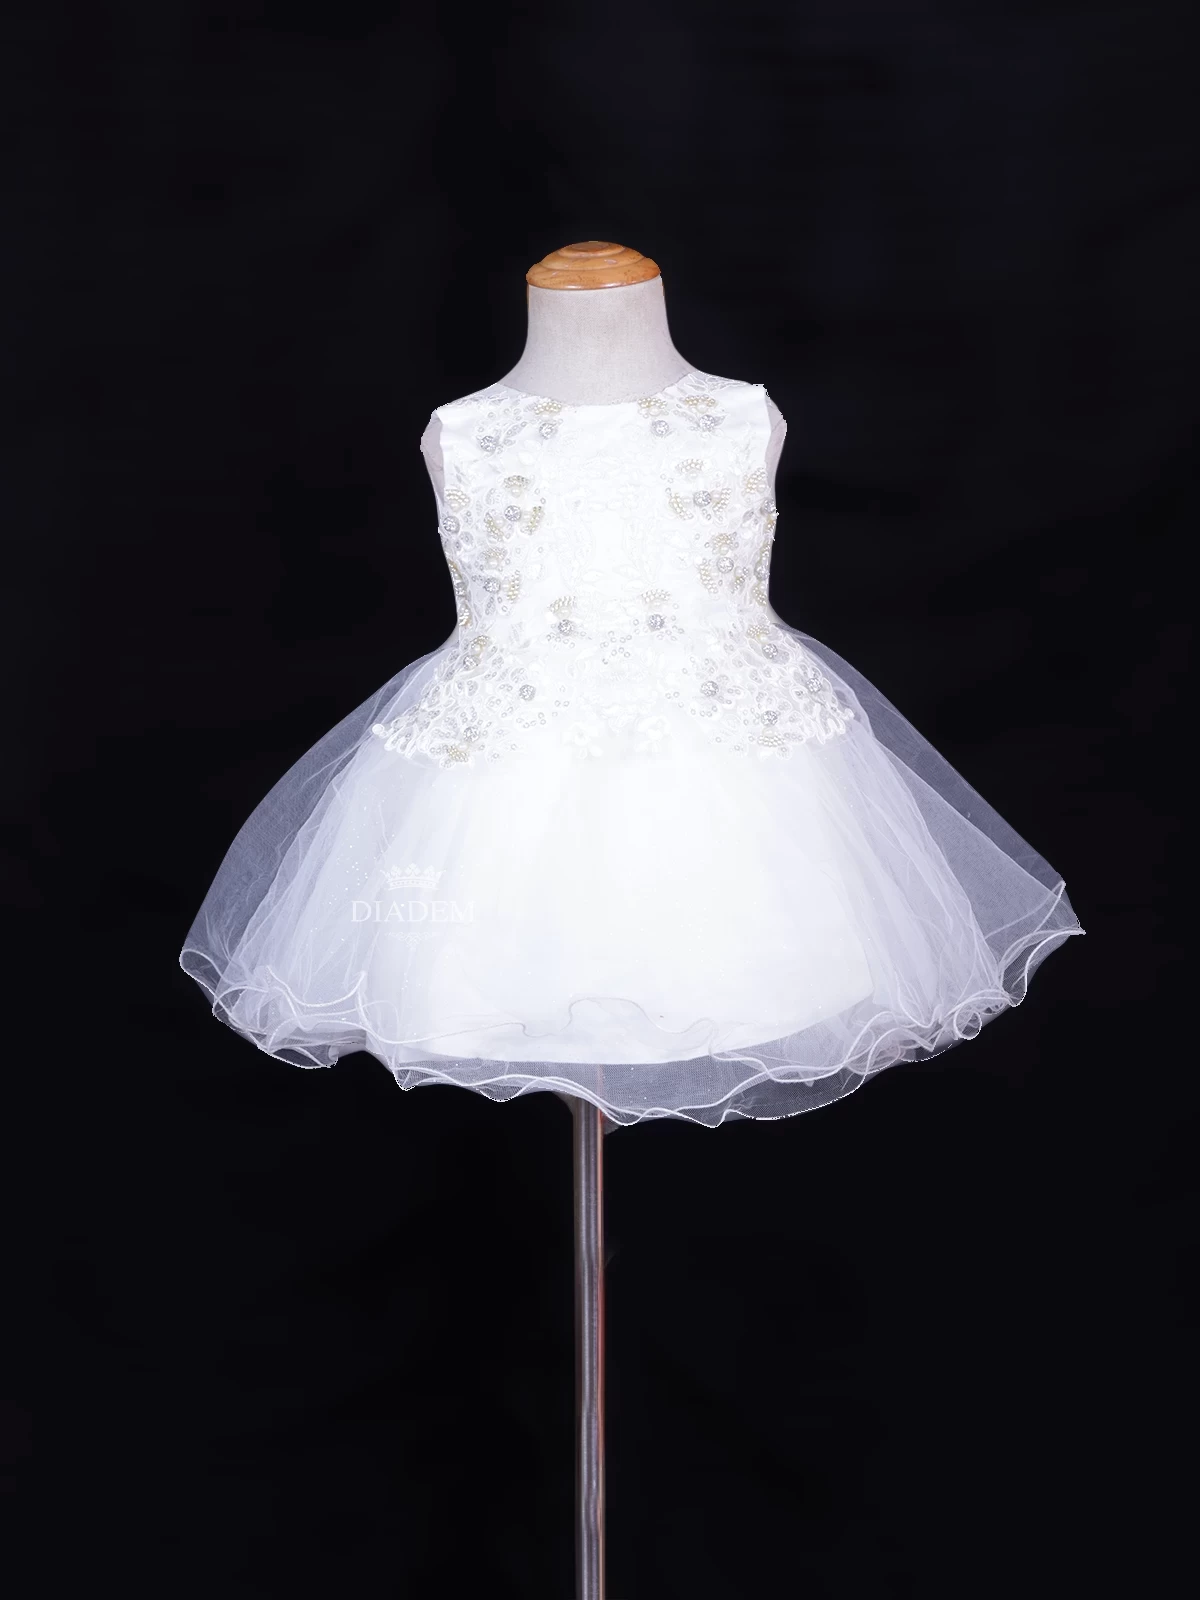 Net Frock Adorned with Floral Laces and Pearl Beads